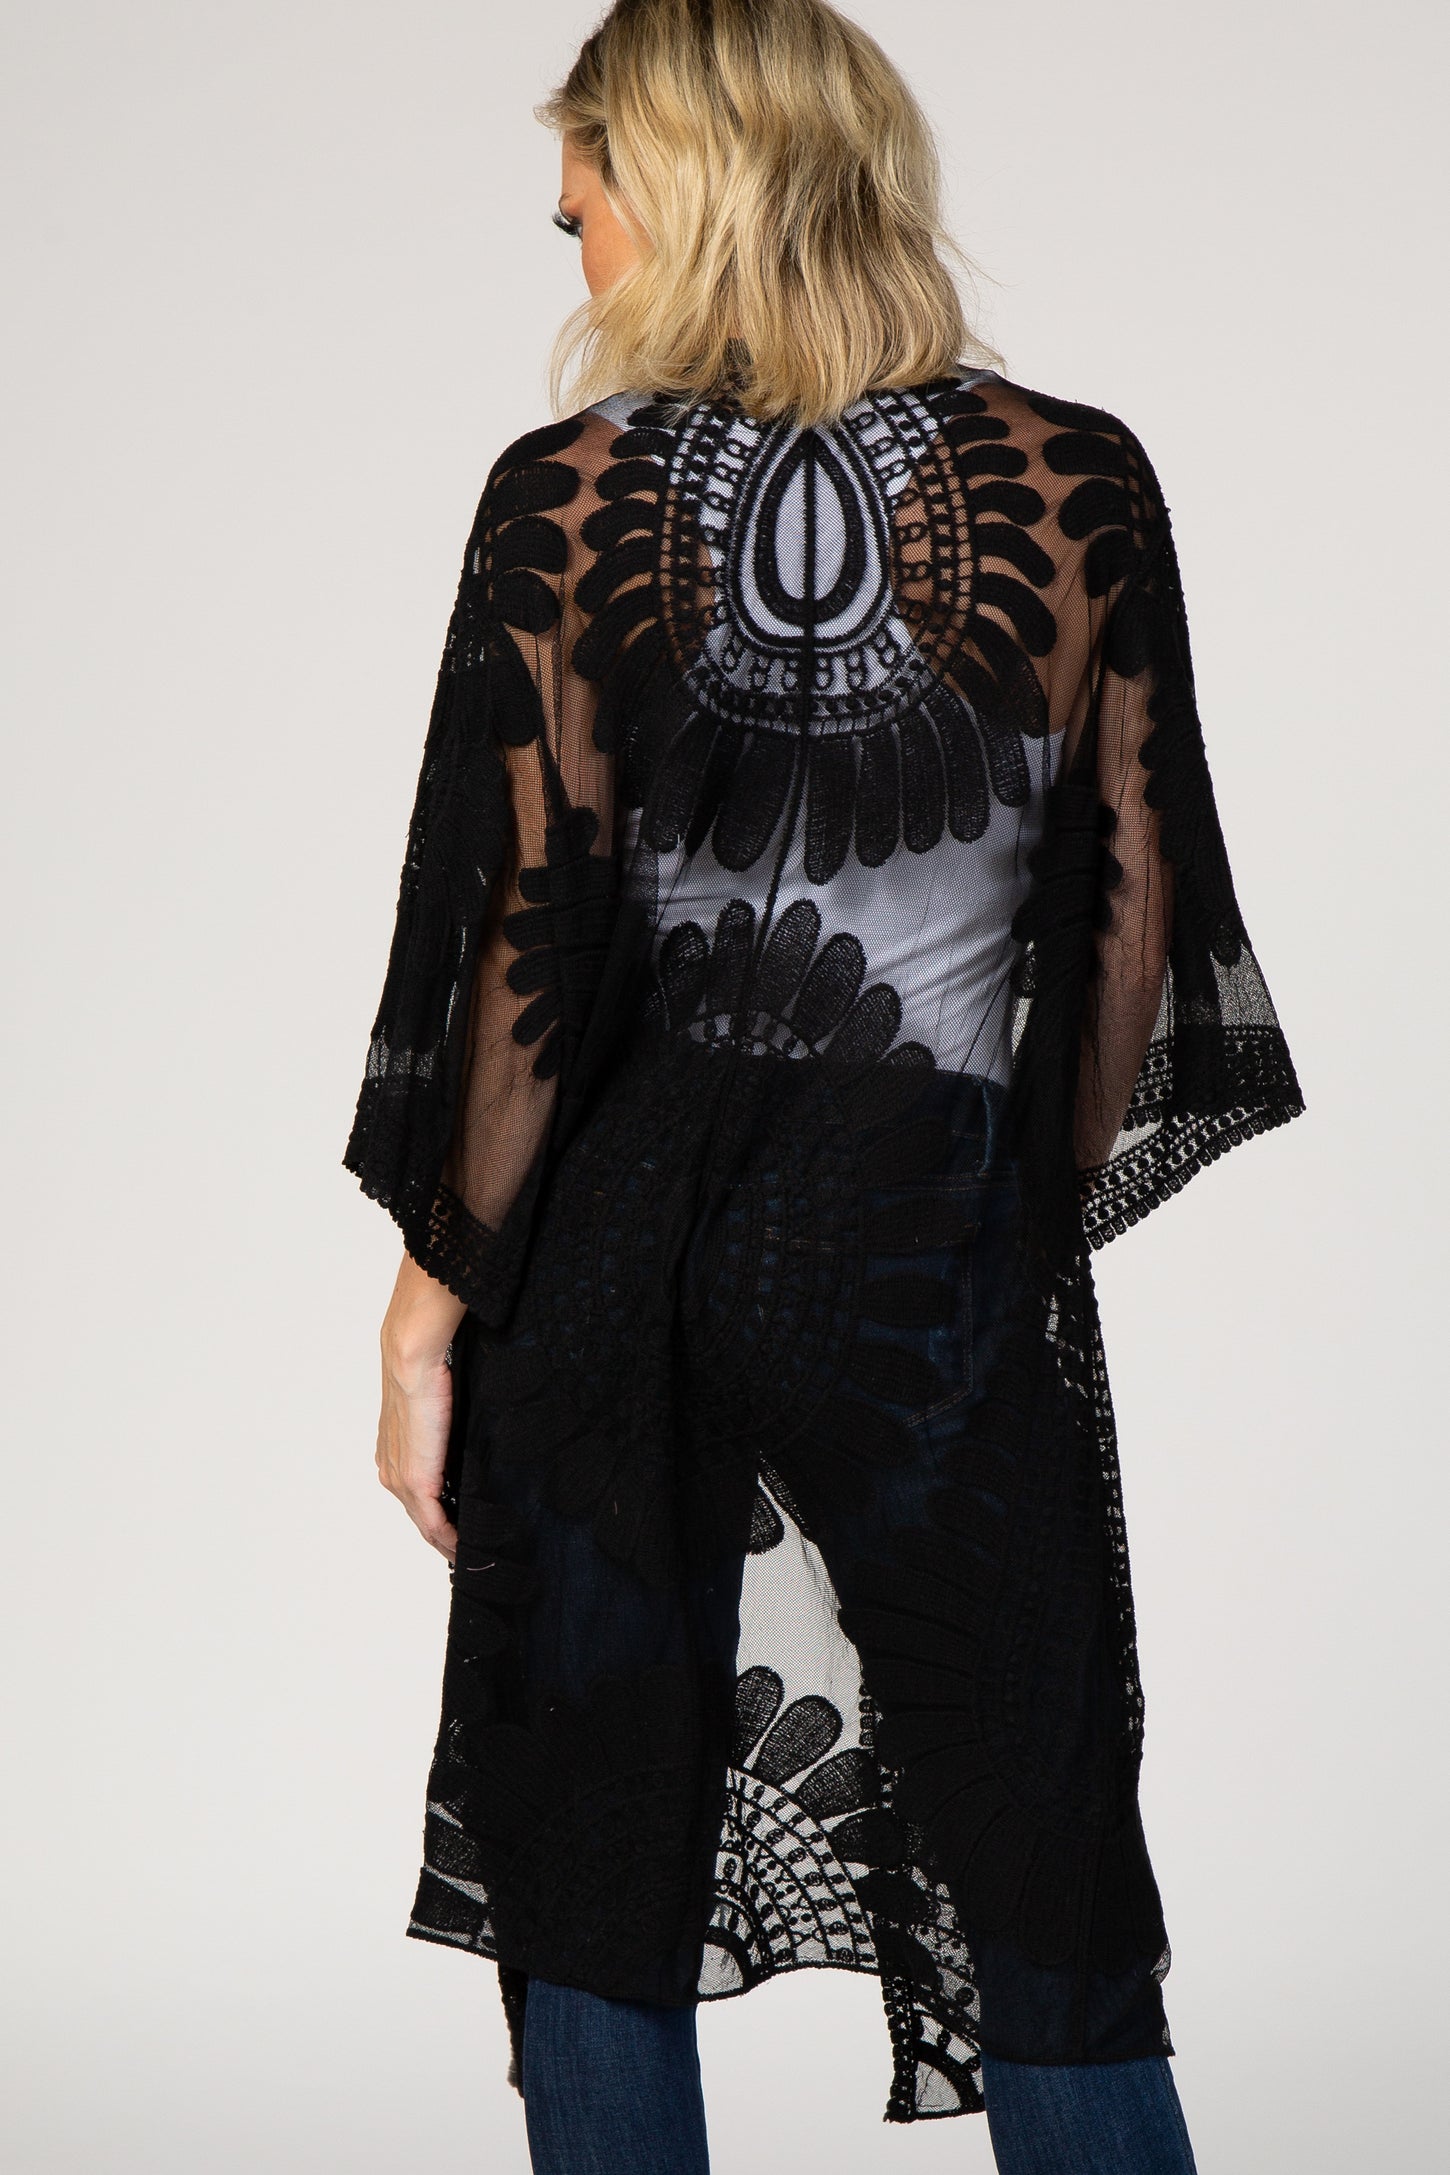 Black Lace Mesh 3/4 Sleeve Cover Up